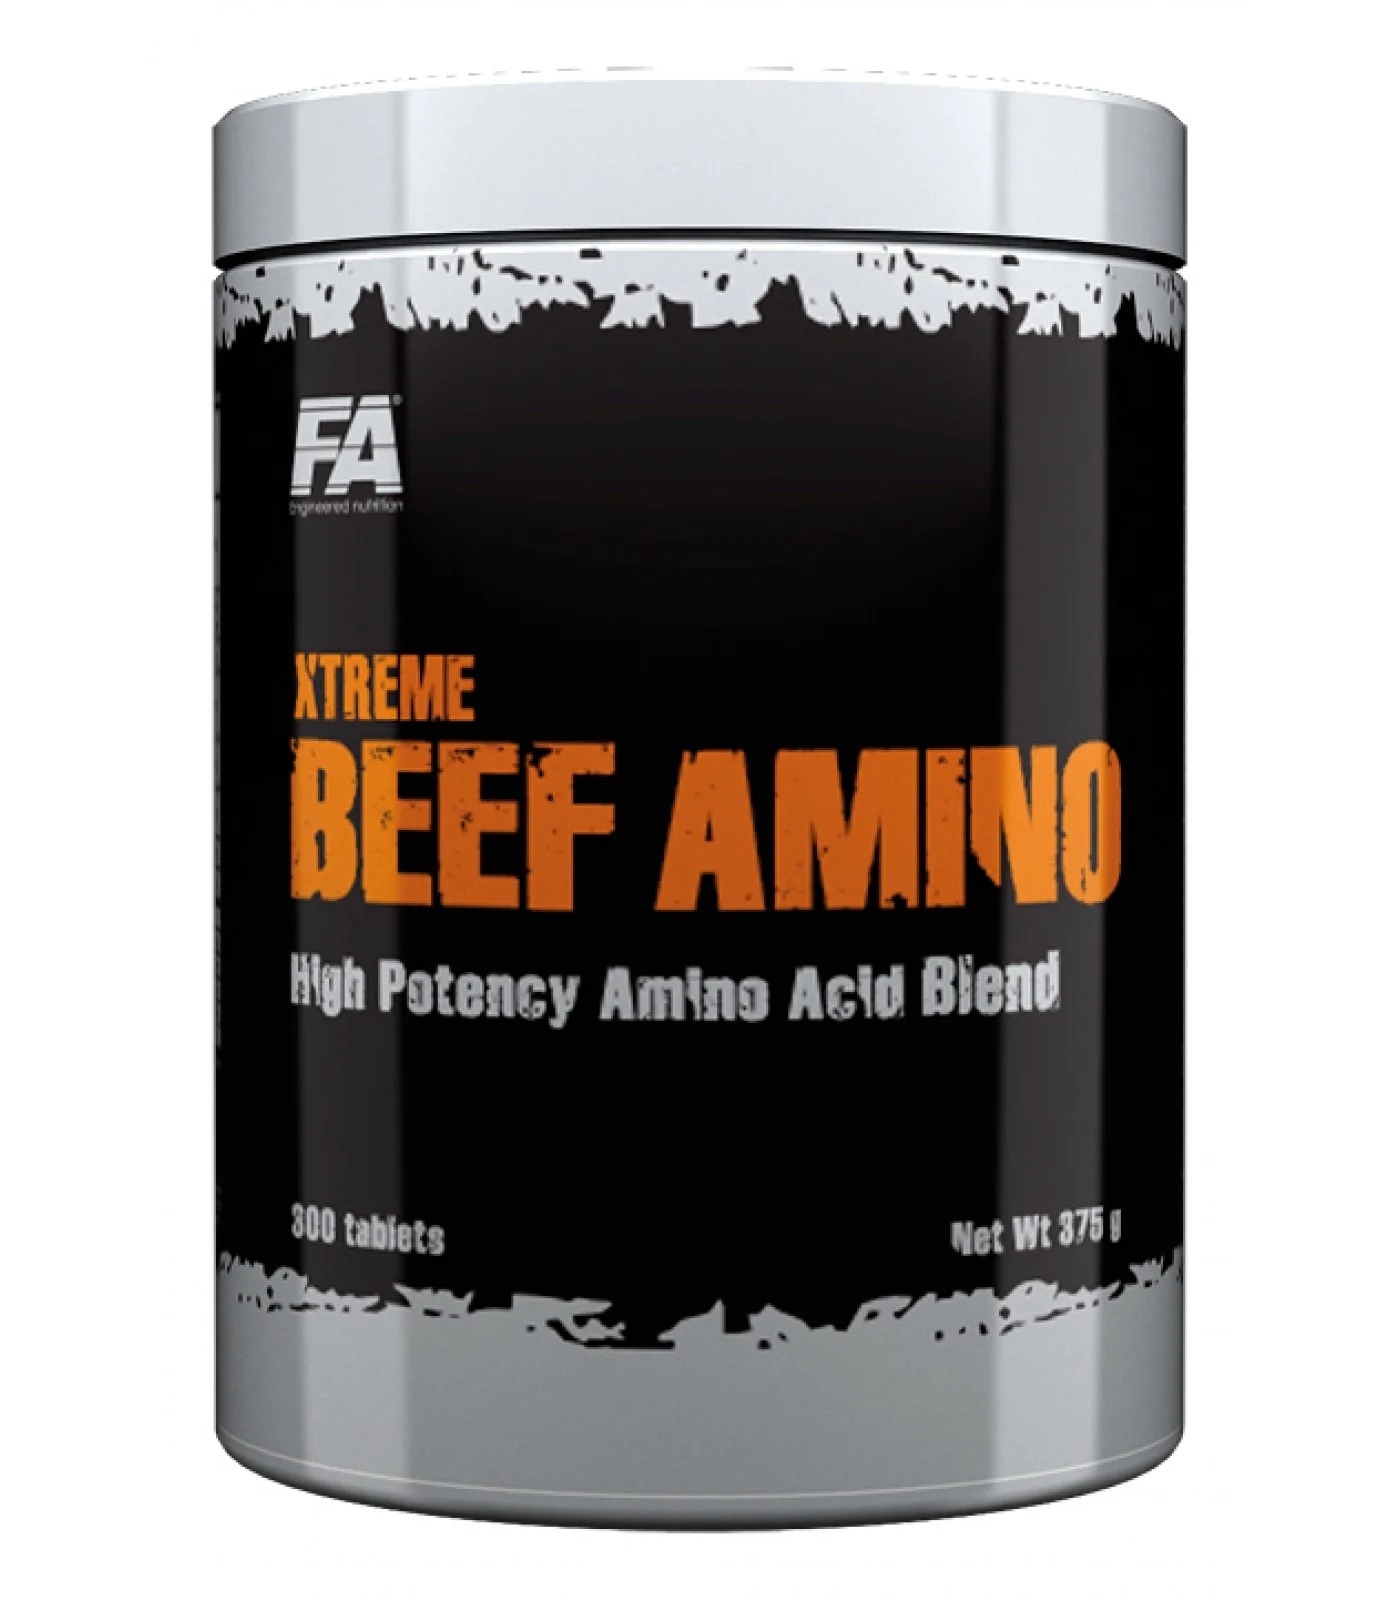 FA Nutrition Xtreme Beef Amino 300 tablets